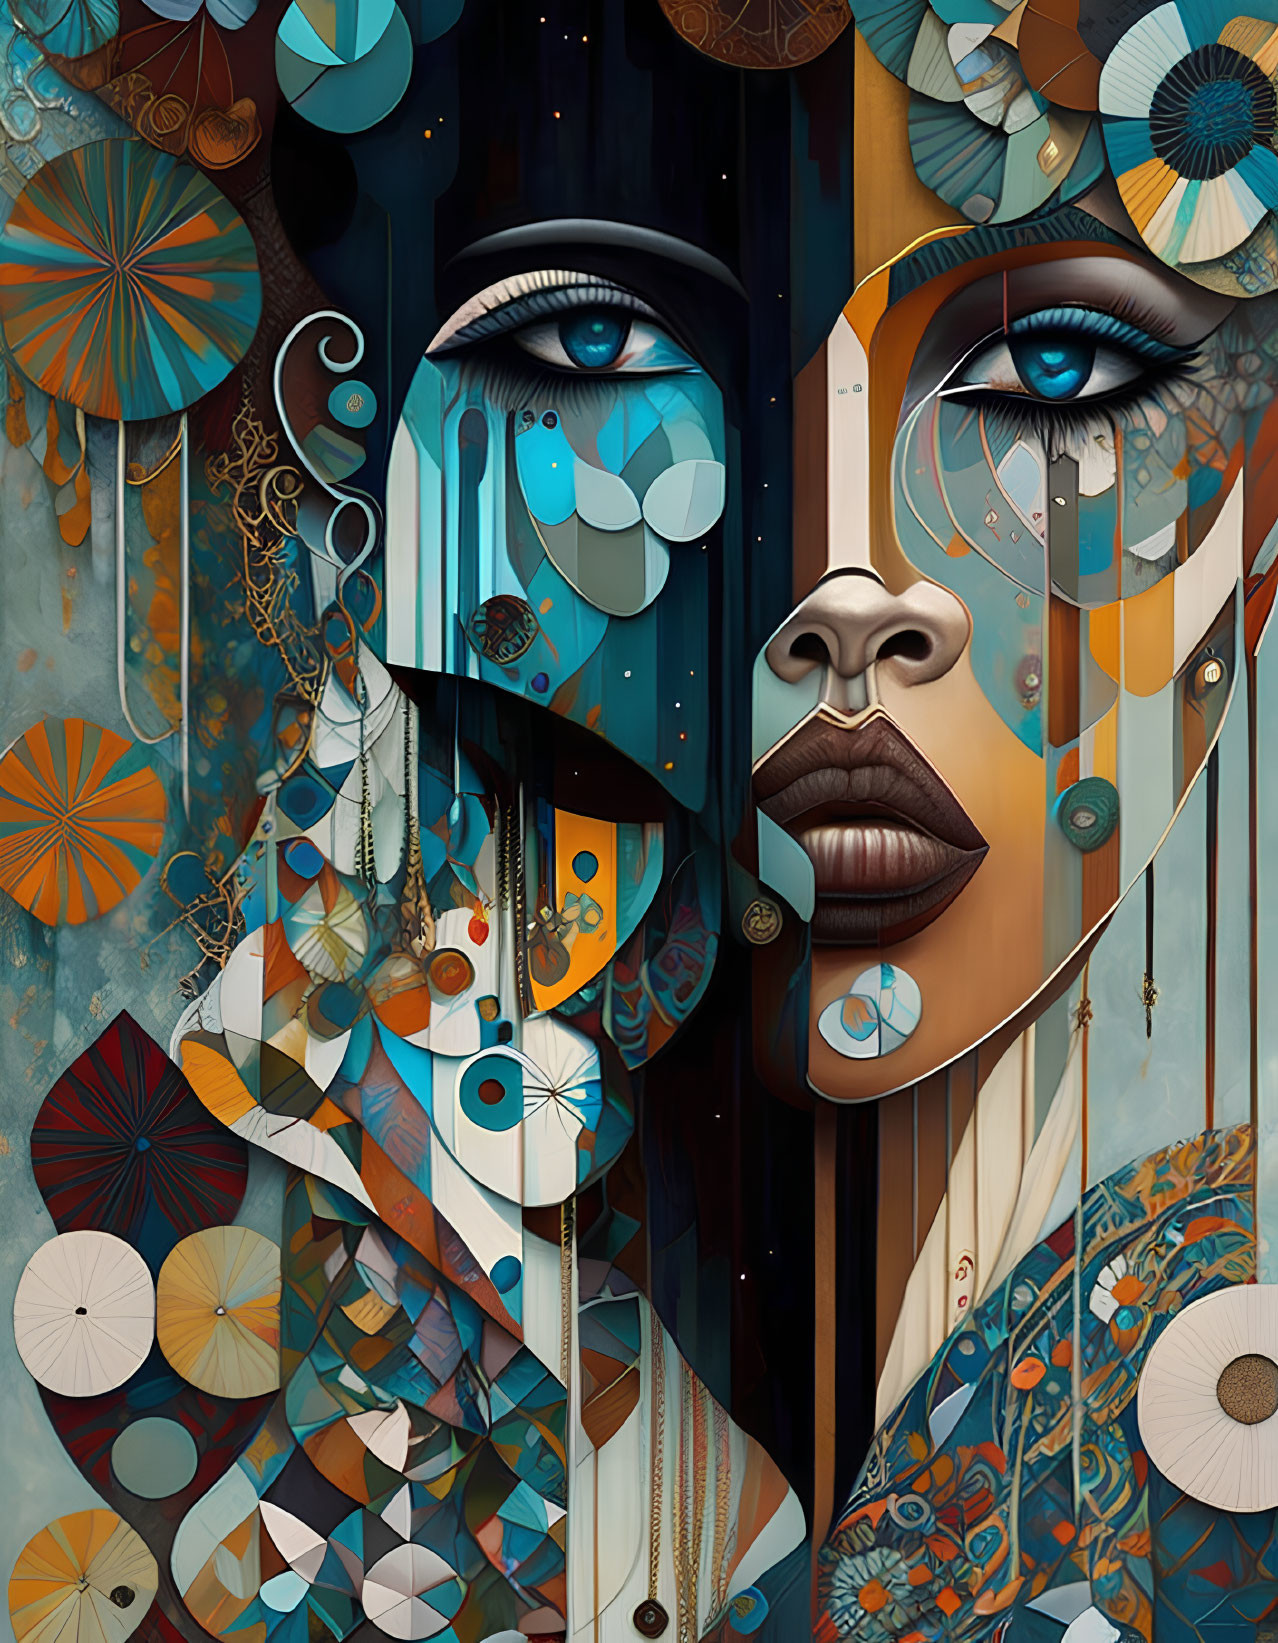 Colorful digital artwork of woman's face with geometric patterns and rich colors